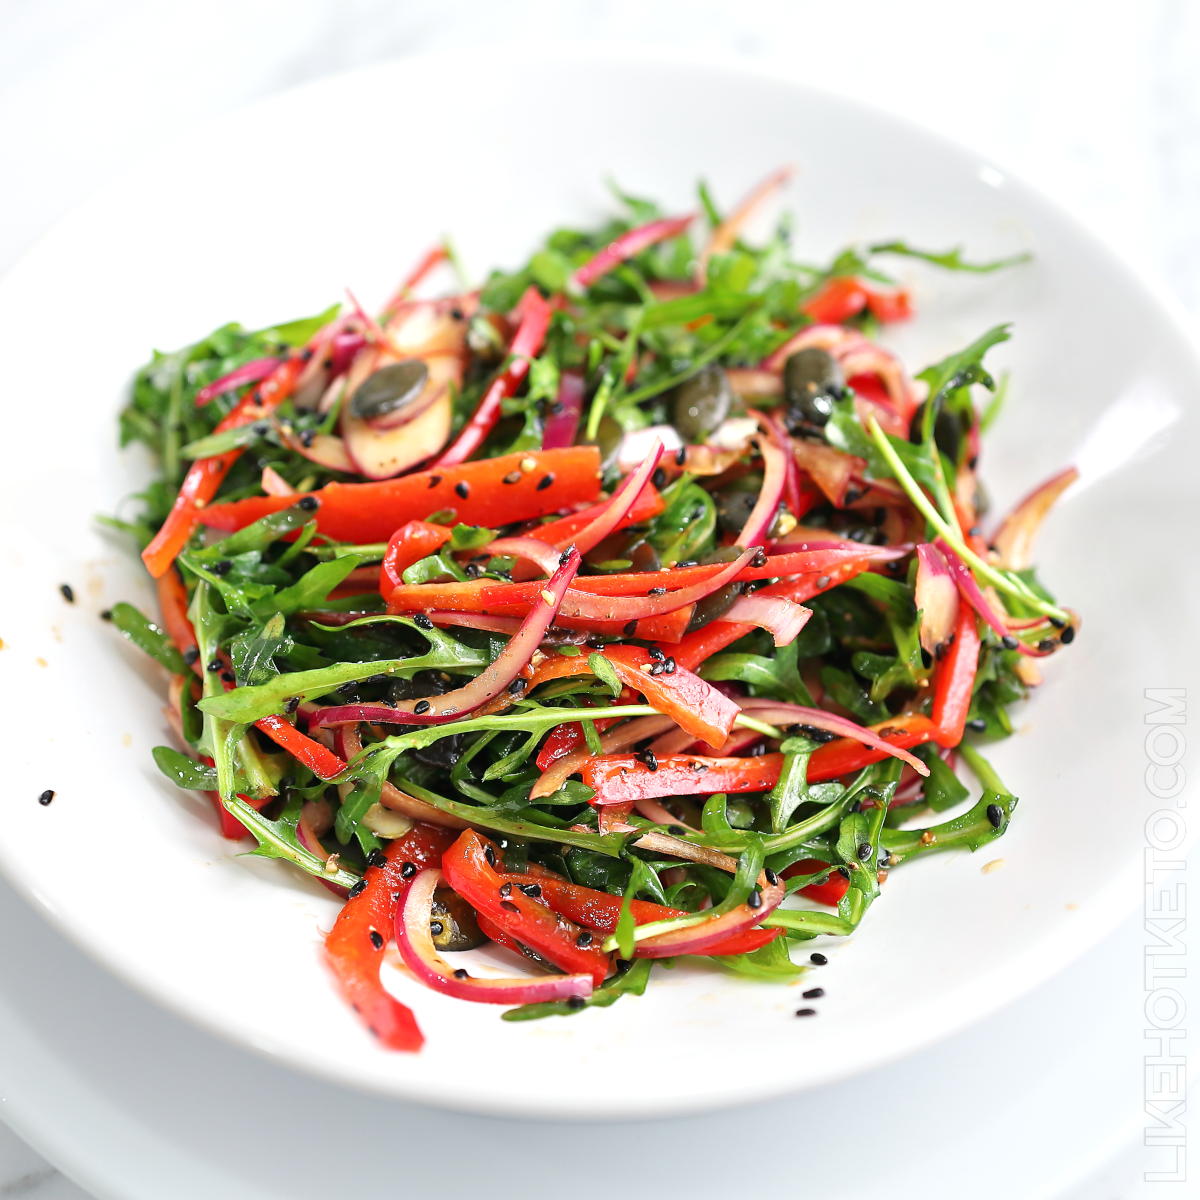 Colorful salad with arugula, red peppers and red onions, sprinkled with black sesame.